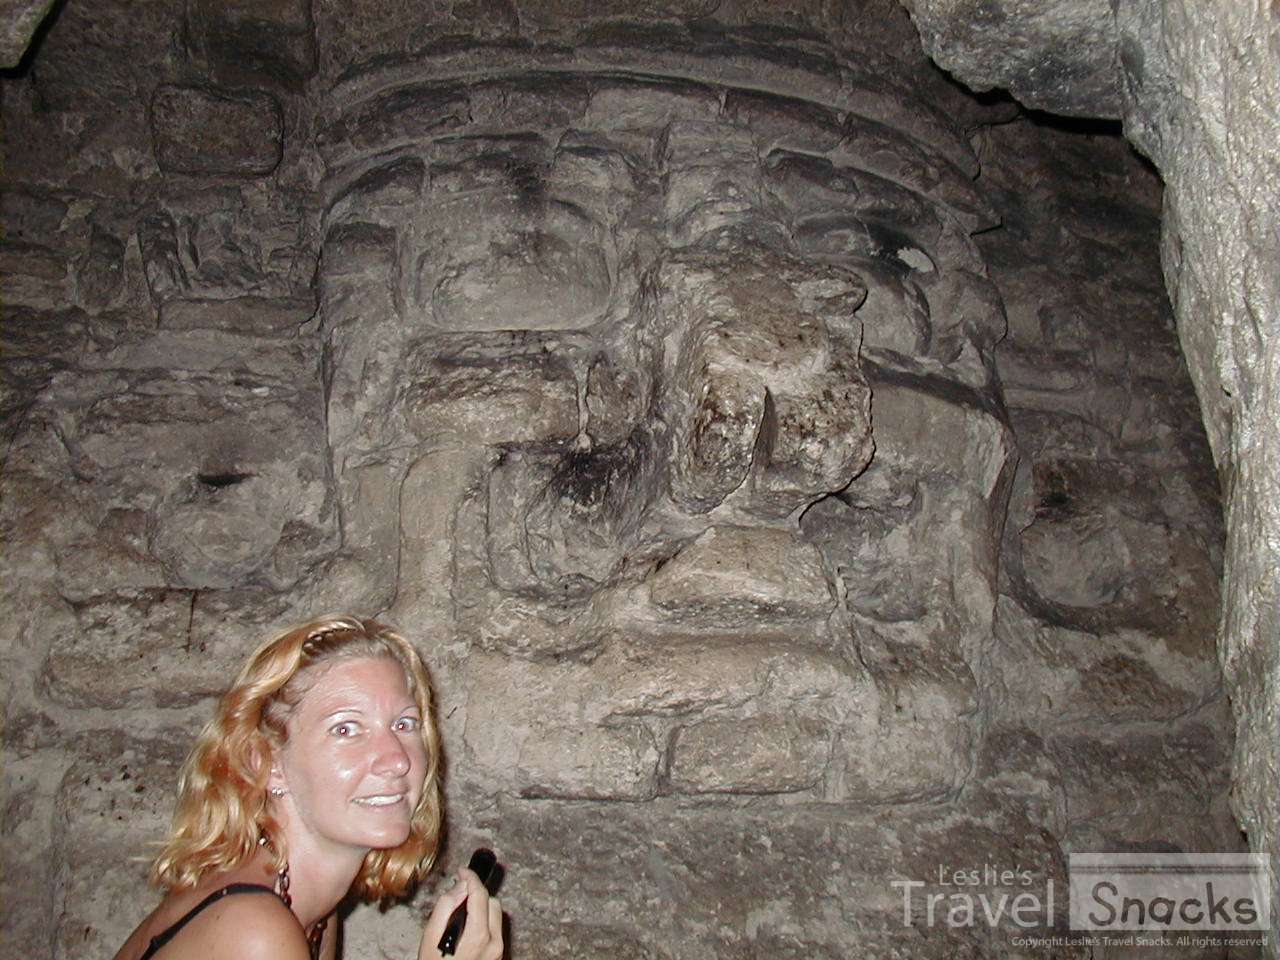 A hidden face inside one of the pyramids at Tikal.